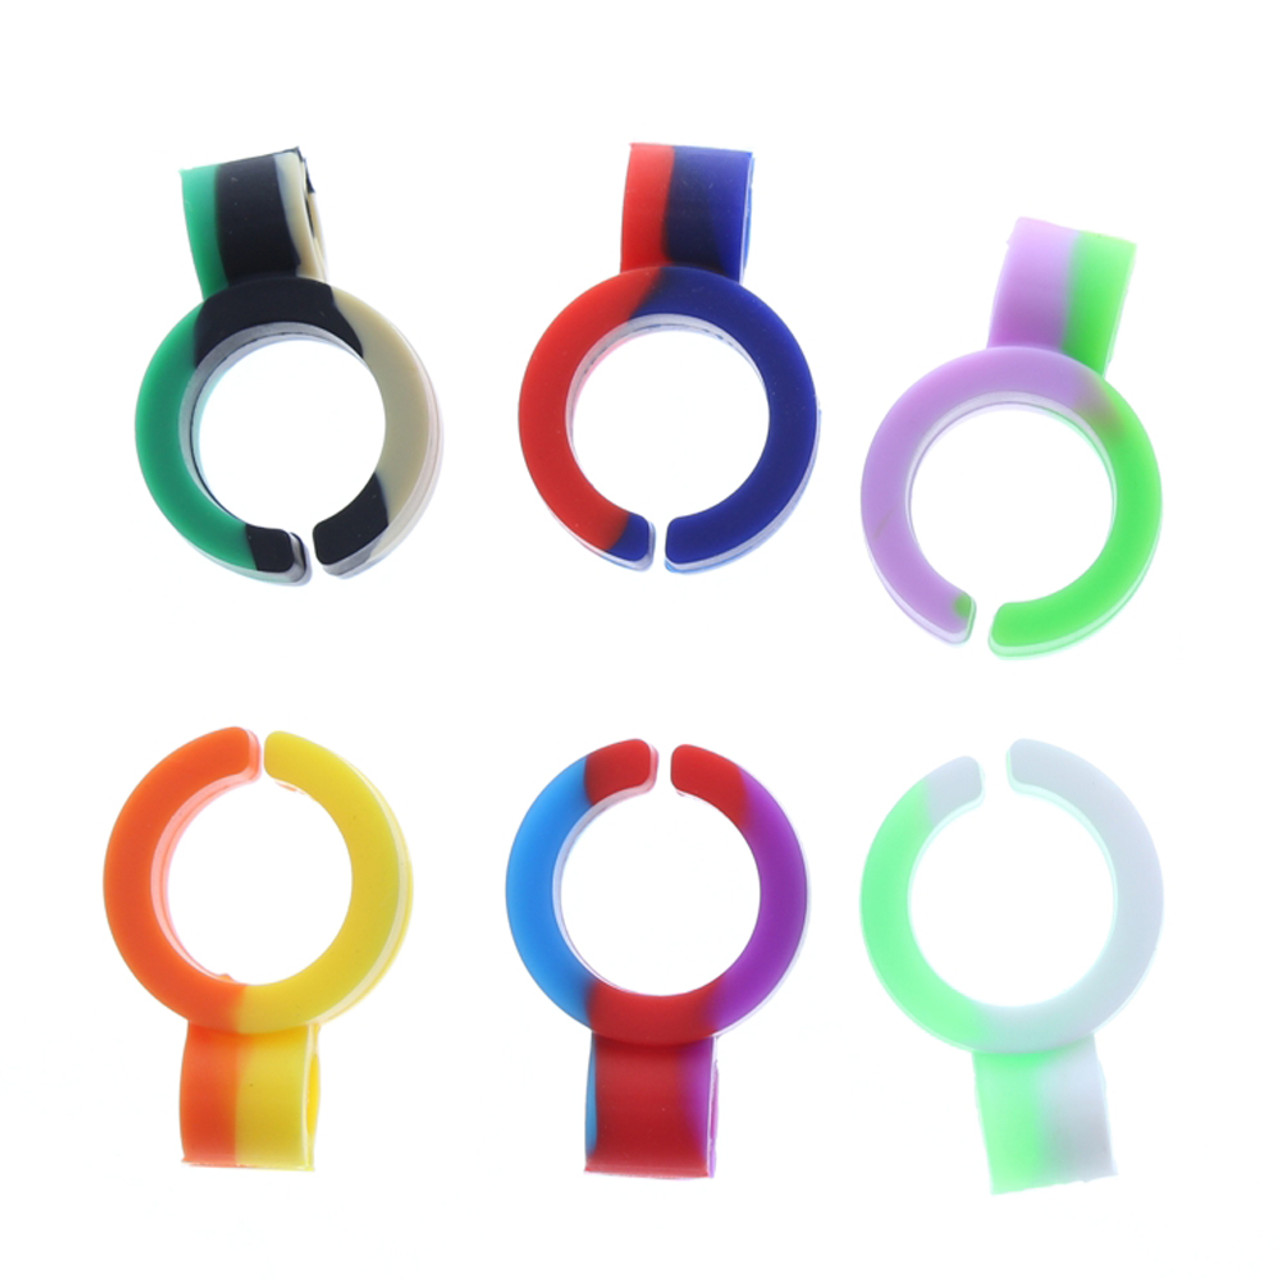 https://cdn11.bigcommerce.com/s-1n8r405nxd/images/stencil/1280x1280/products/6705/10202/silicone_joint_cig_blunt_holder_ring_colors_best_smoke_shop_2__13808.1571841453.jpg?c=2